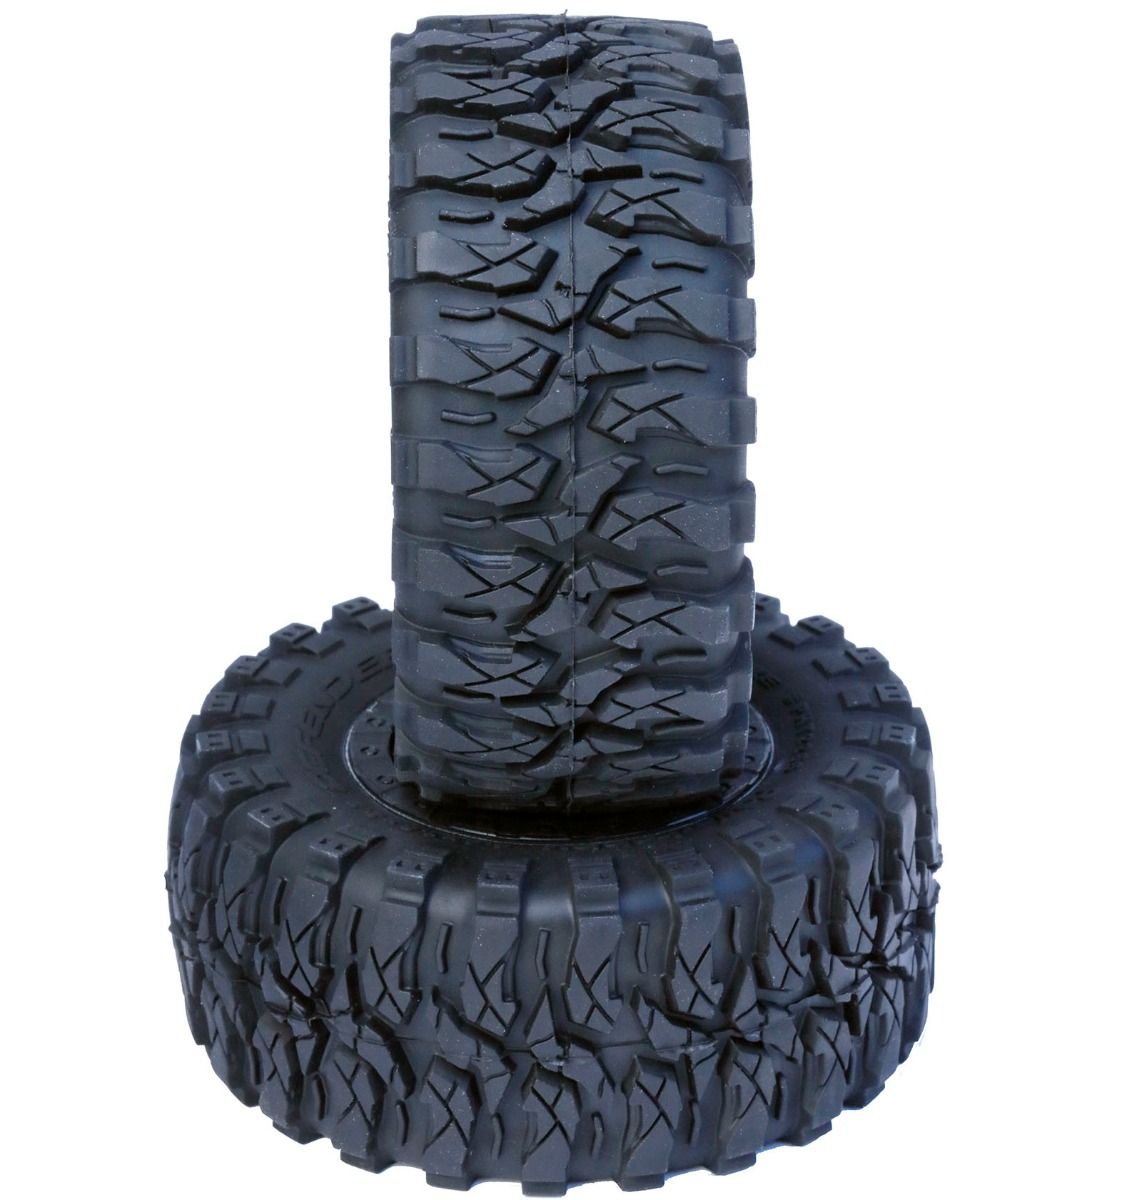 TIRES 1/10 OFF-ROAD 12MM – Island Hobby Nut